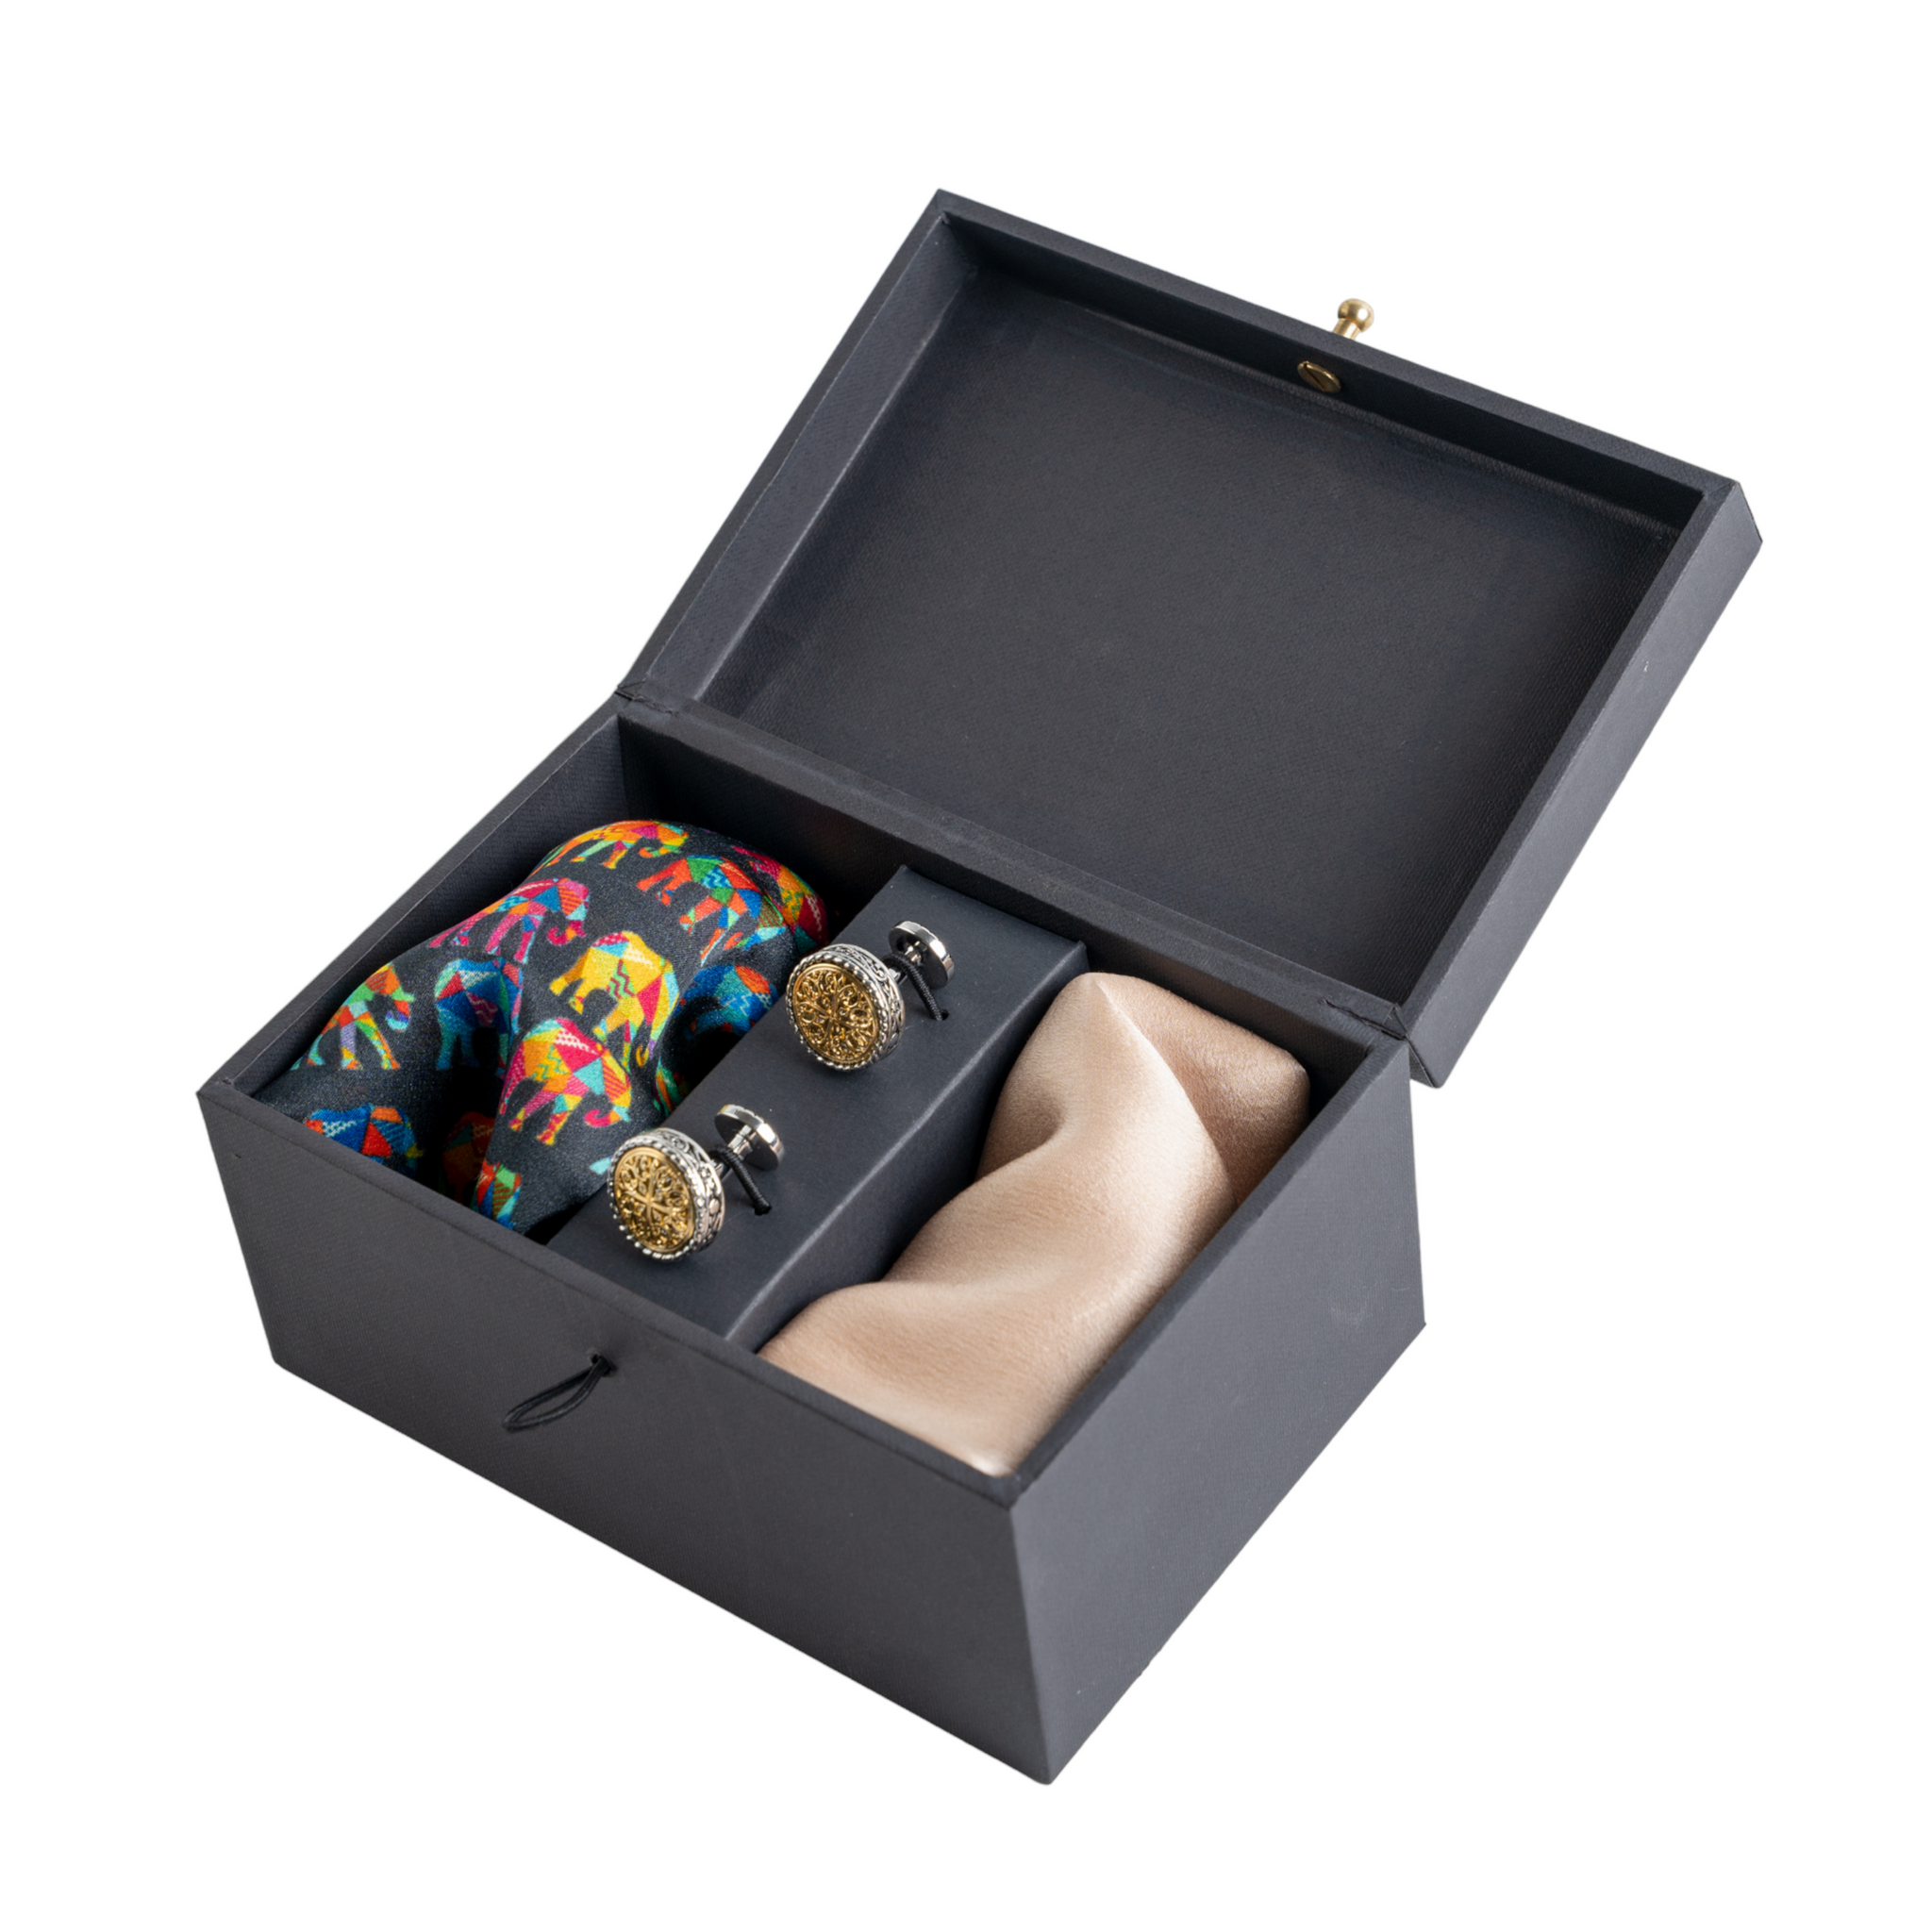 Chokore Special 3-in-1 Gift Set, Beige (2 Pocket Squares and Cufflinks)